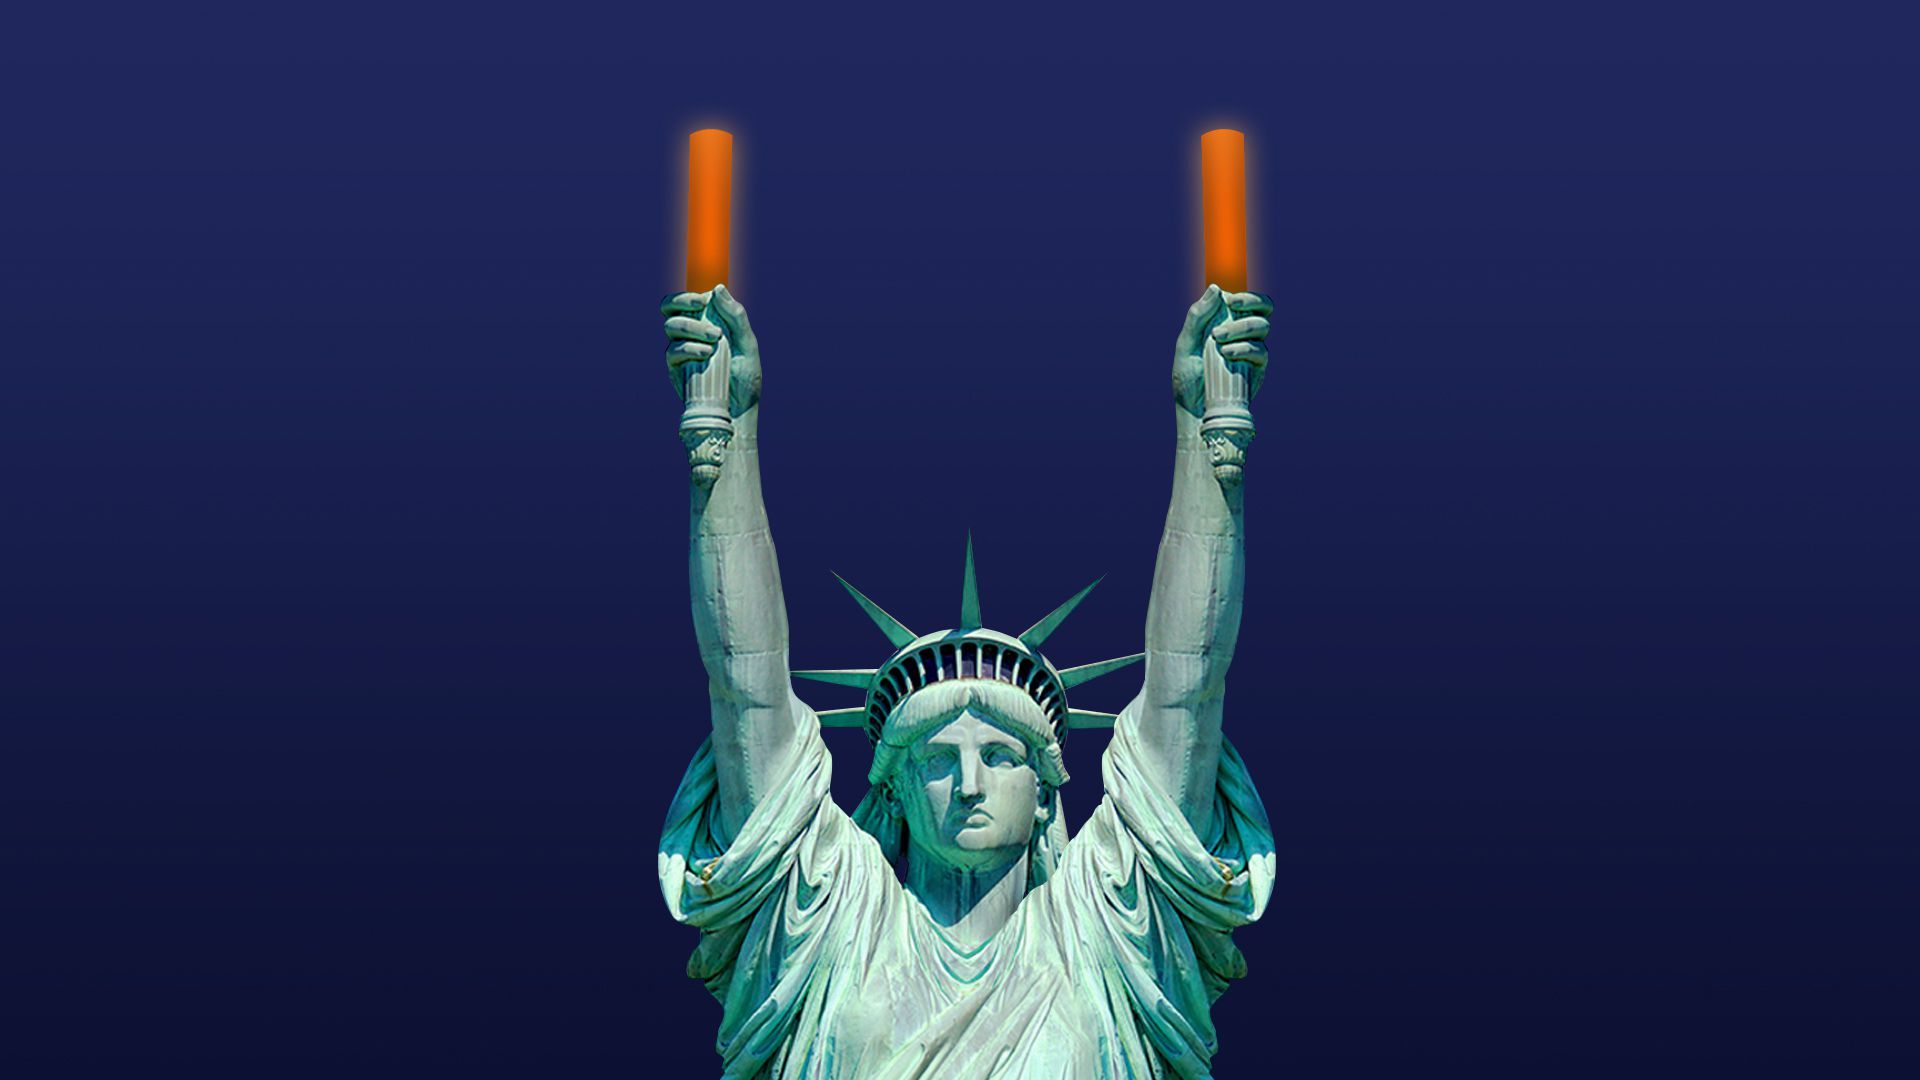 Illustration of the statue of liberty holding up lit batons to direct a plane